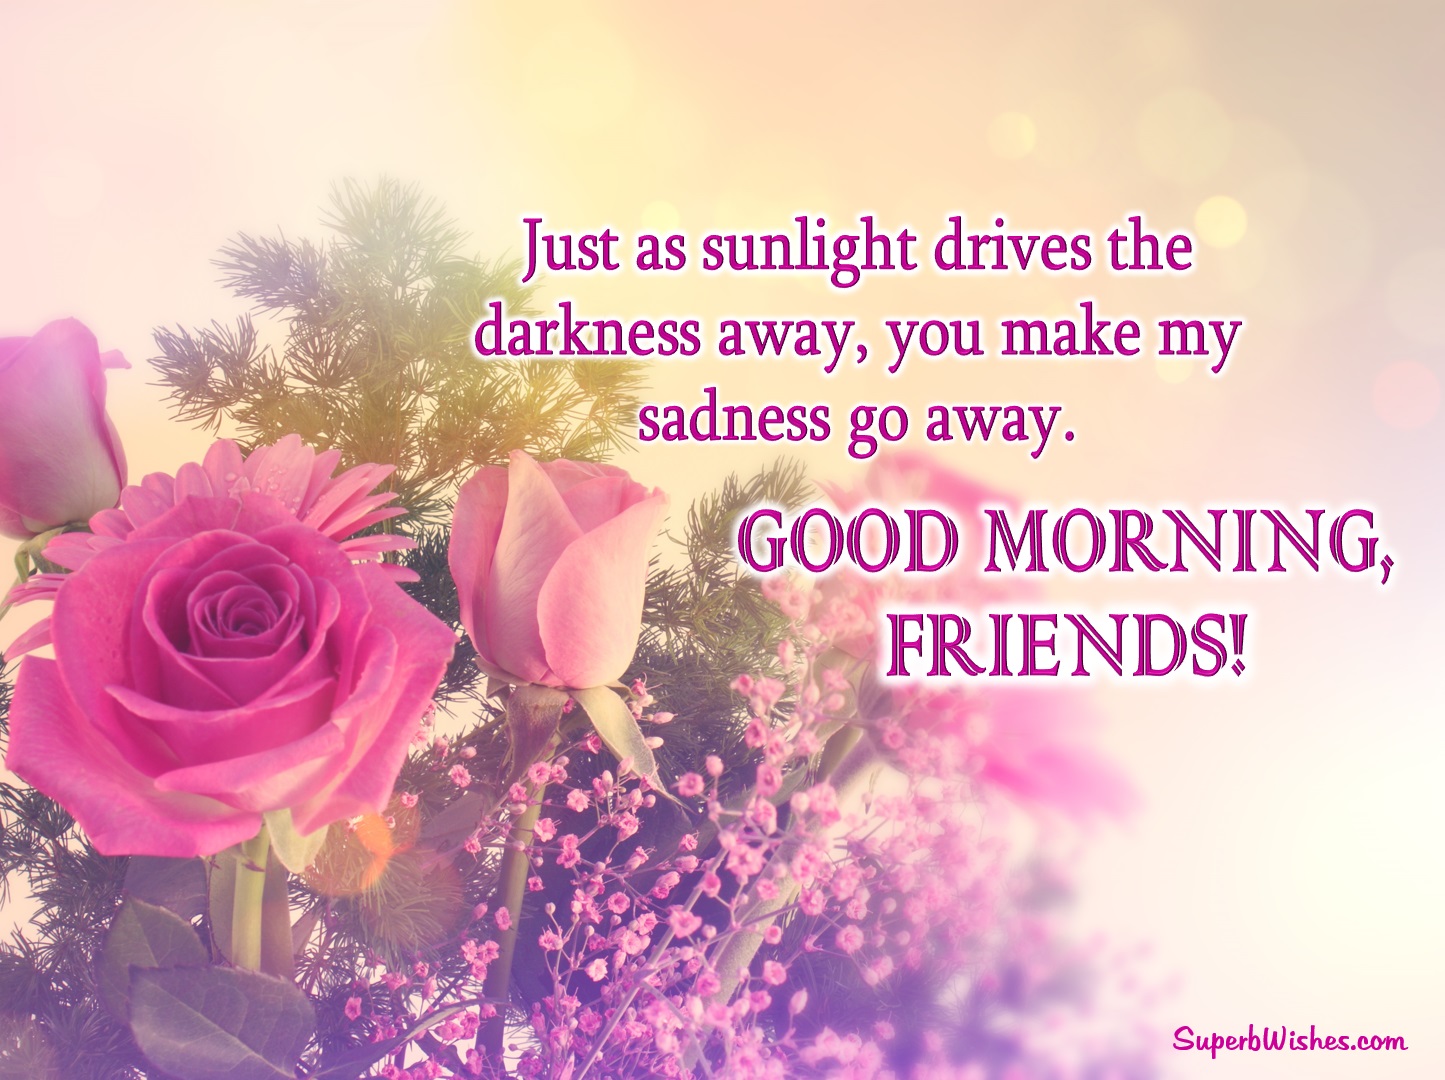 Good Morning Wishes For Best Friends. Superbwishes.com